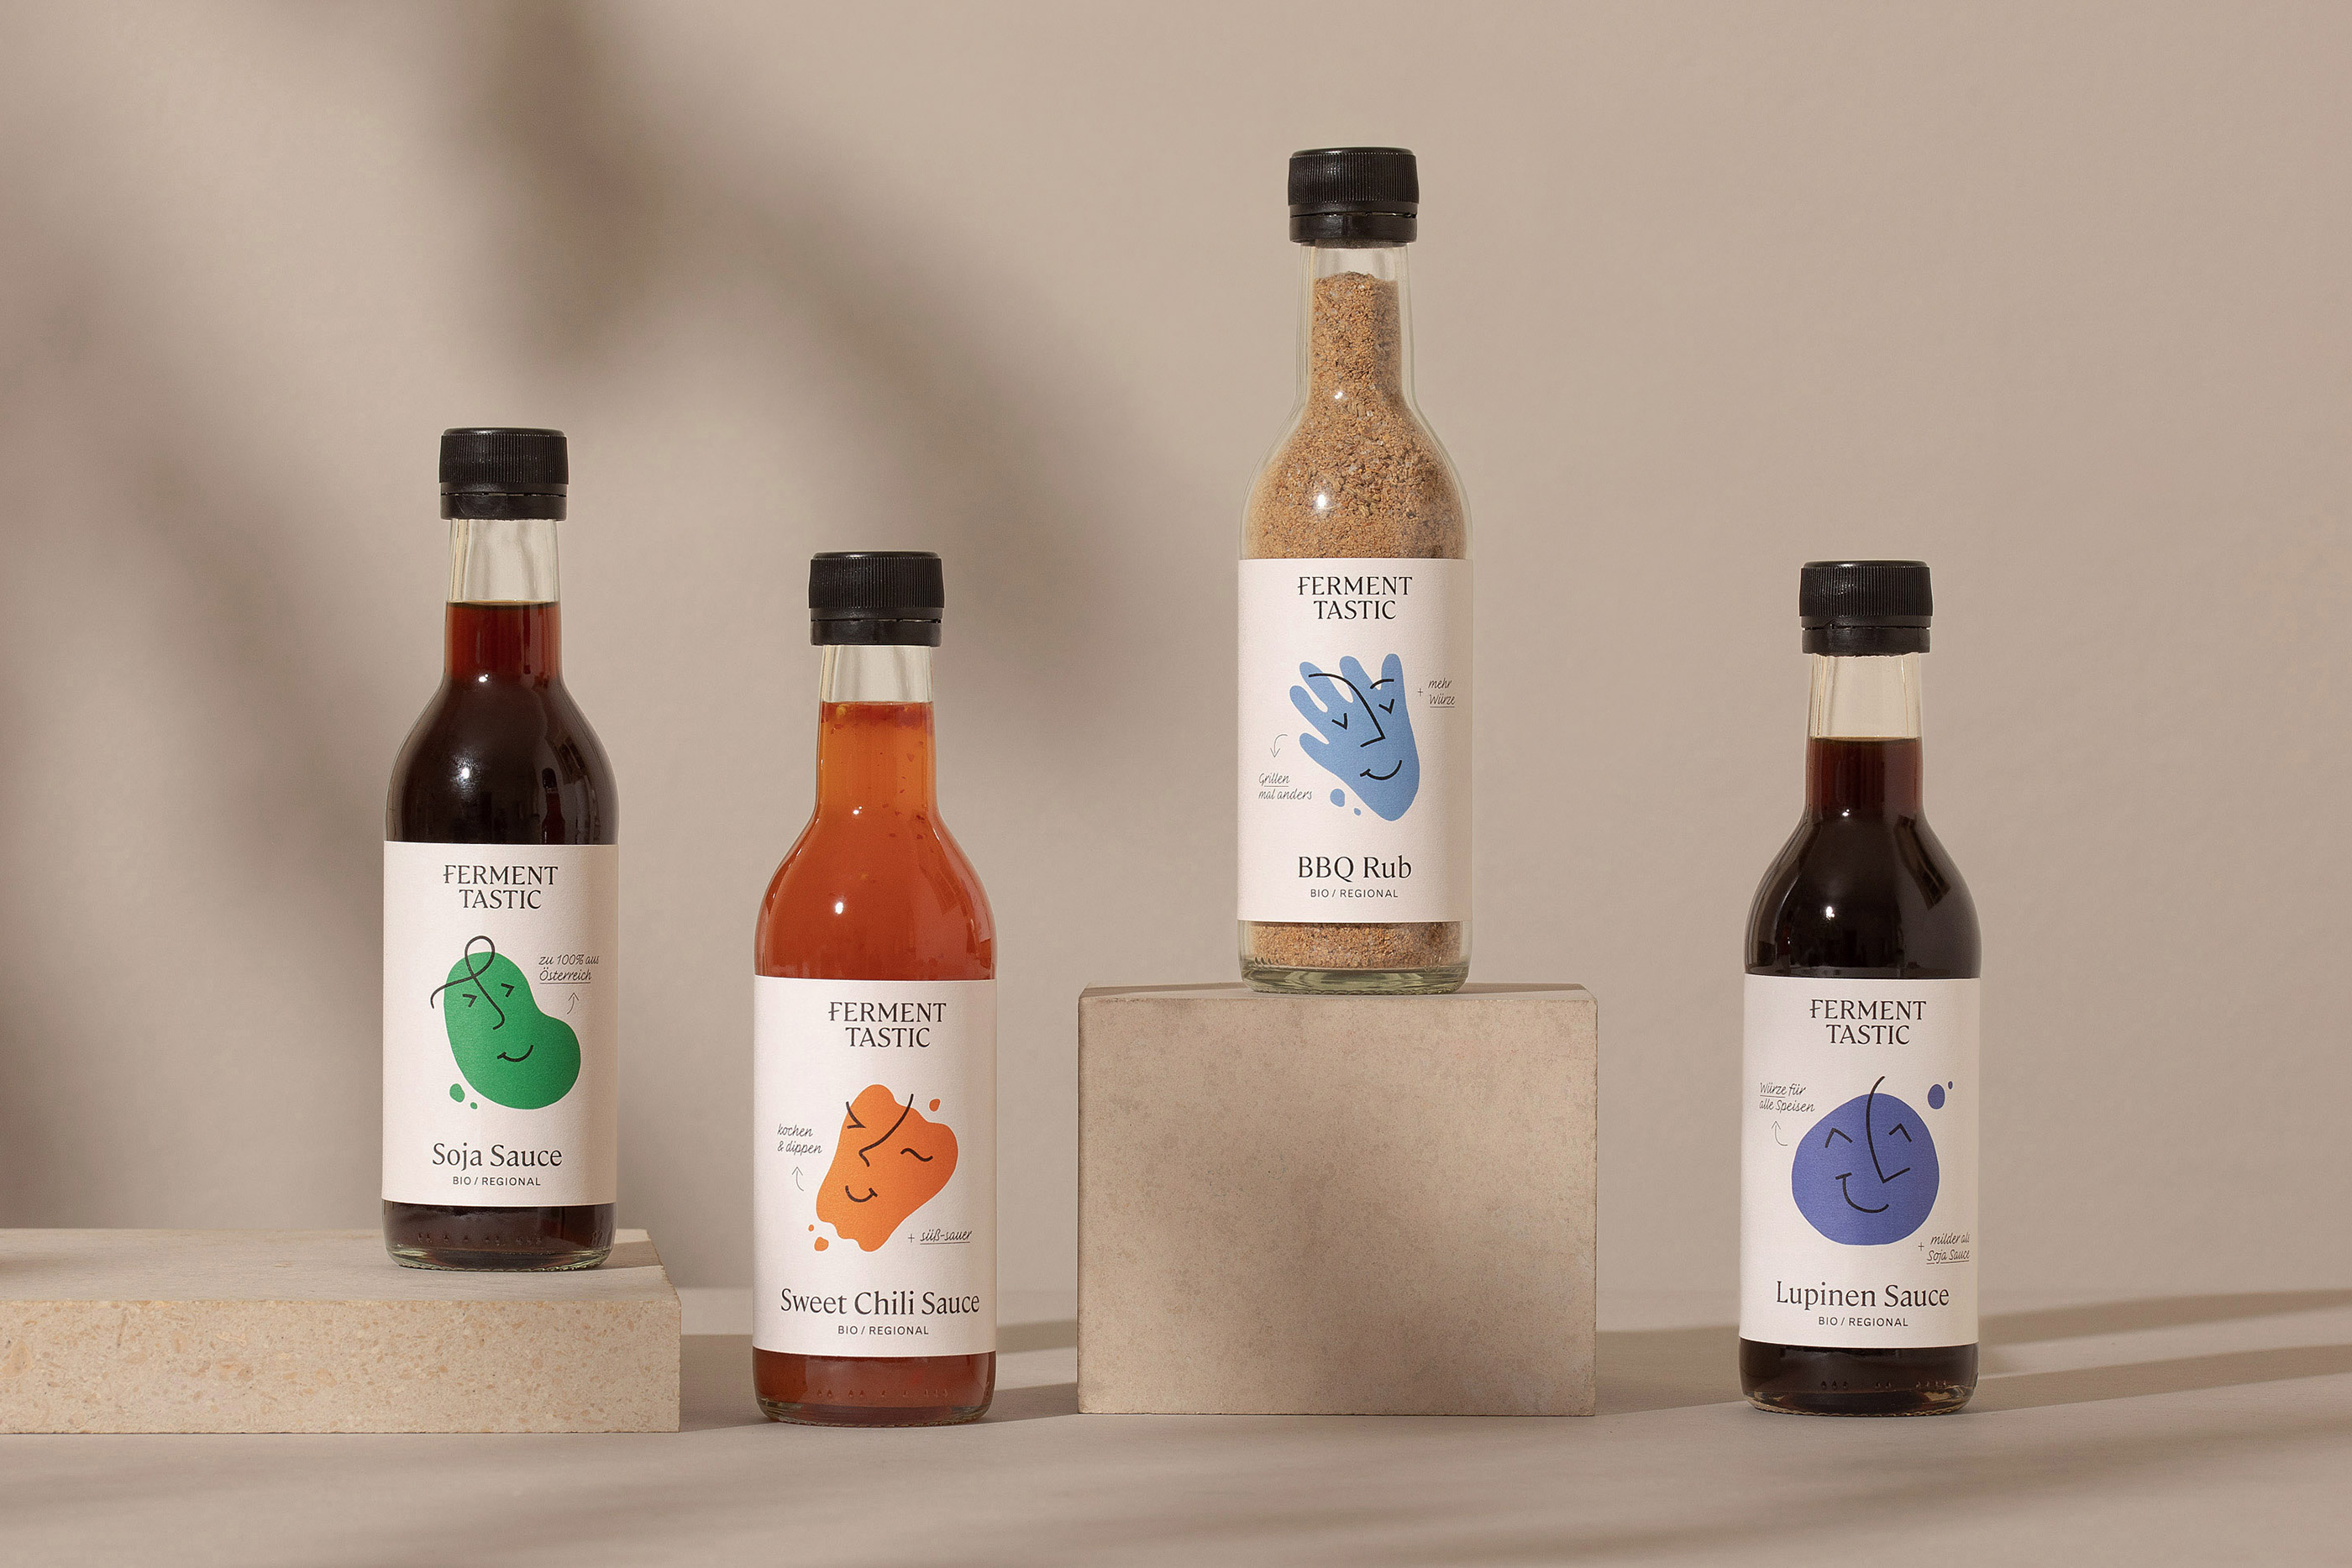 Acute Helps Ferment-Tastic Bring New Flavours to Your Kitchen with Creative Condiments